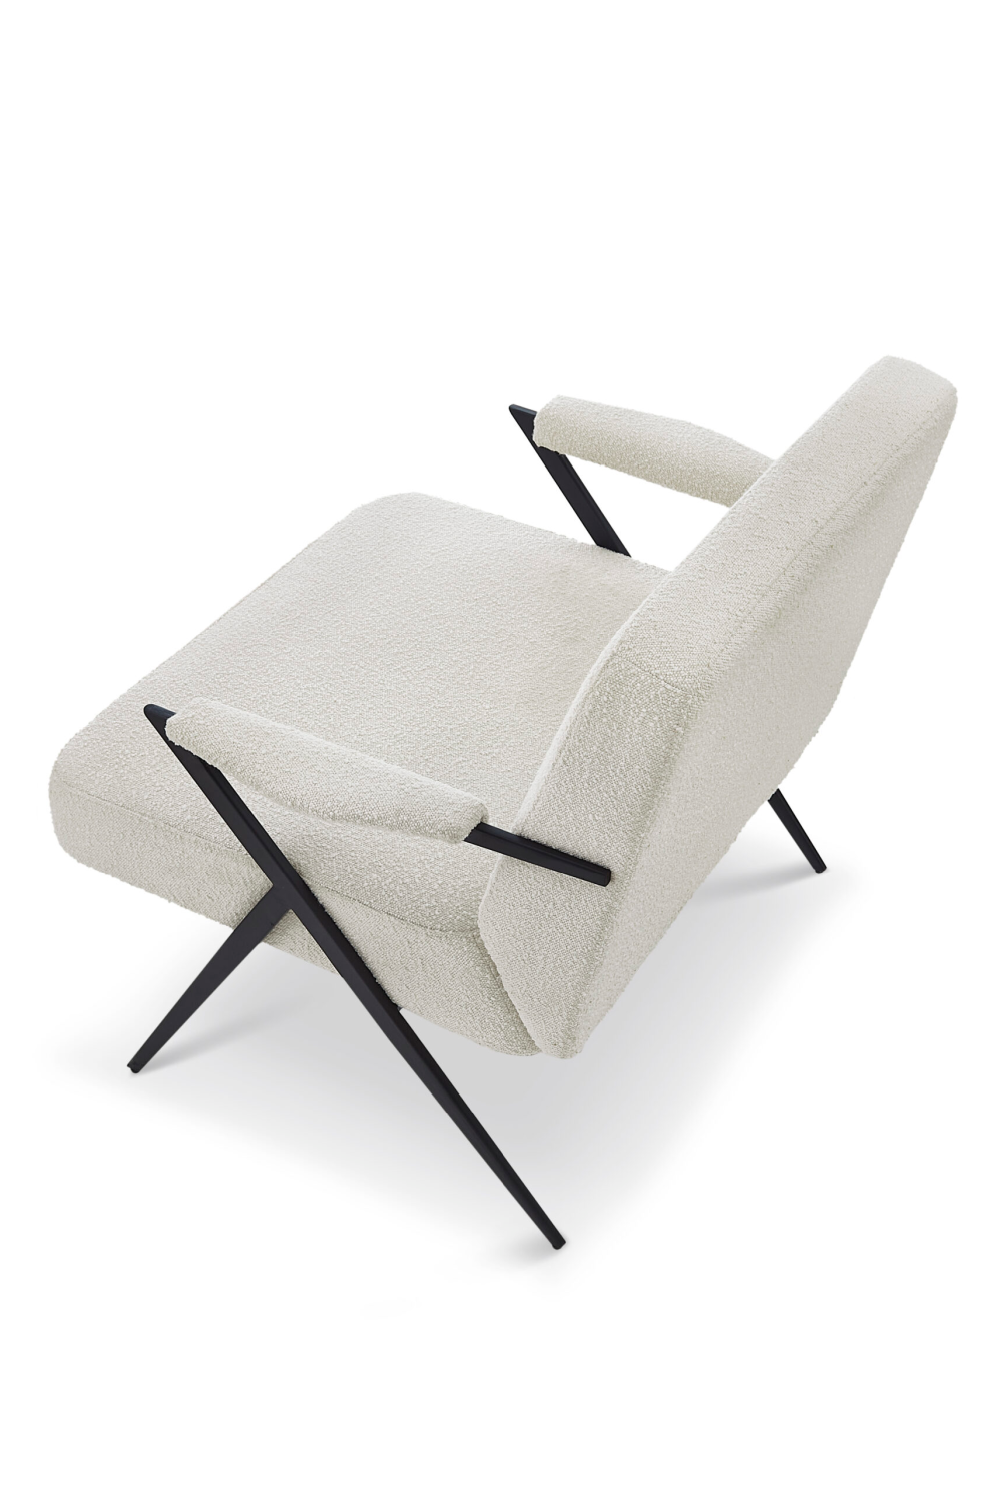 Industrial Style Occasional Chair | Liang & Eimil Ponti | Oroa.com